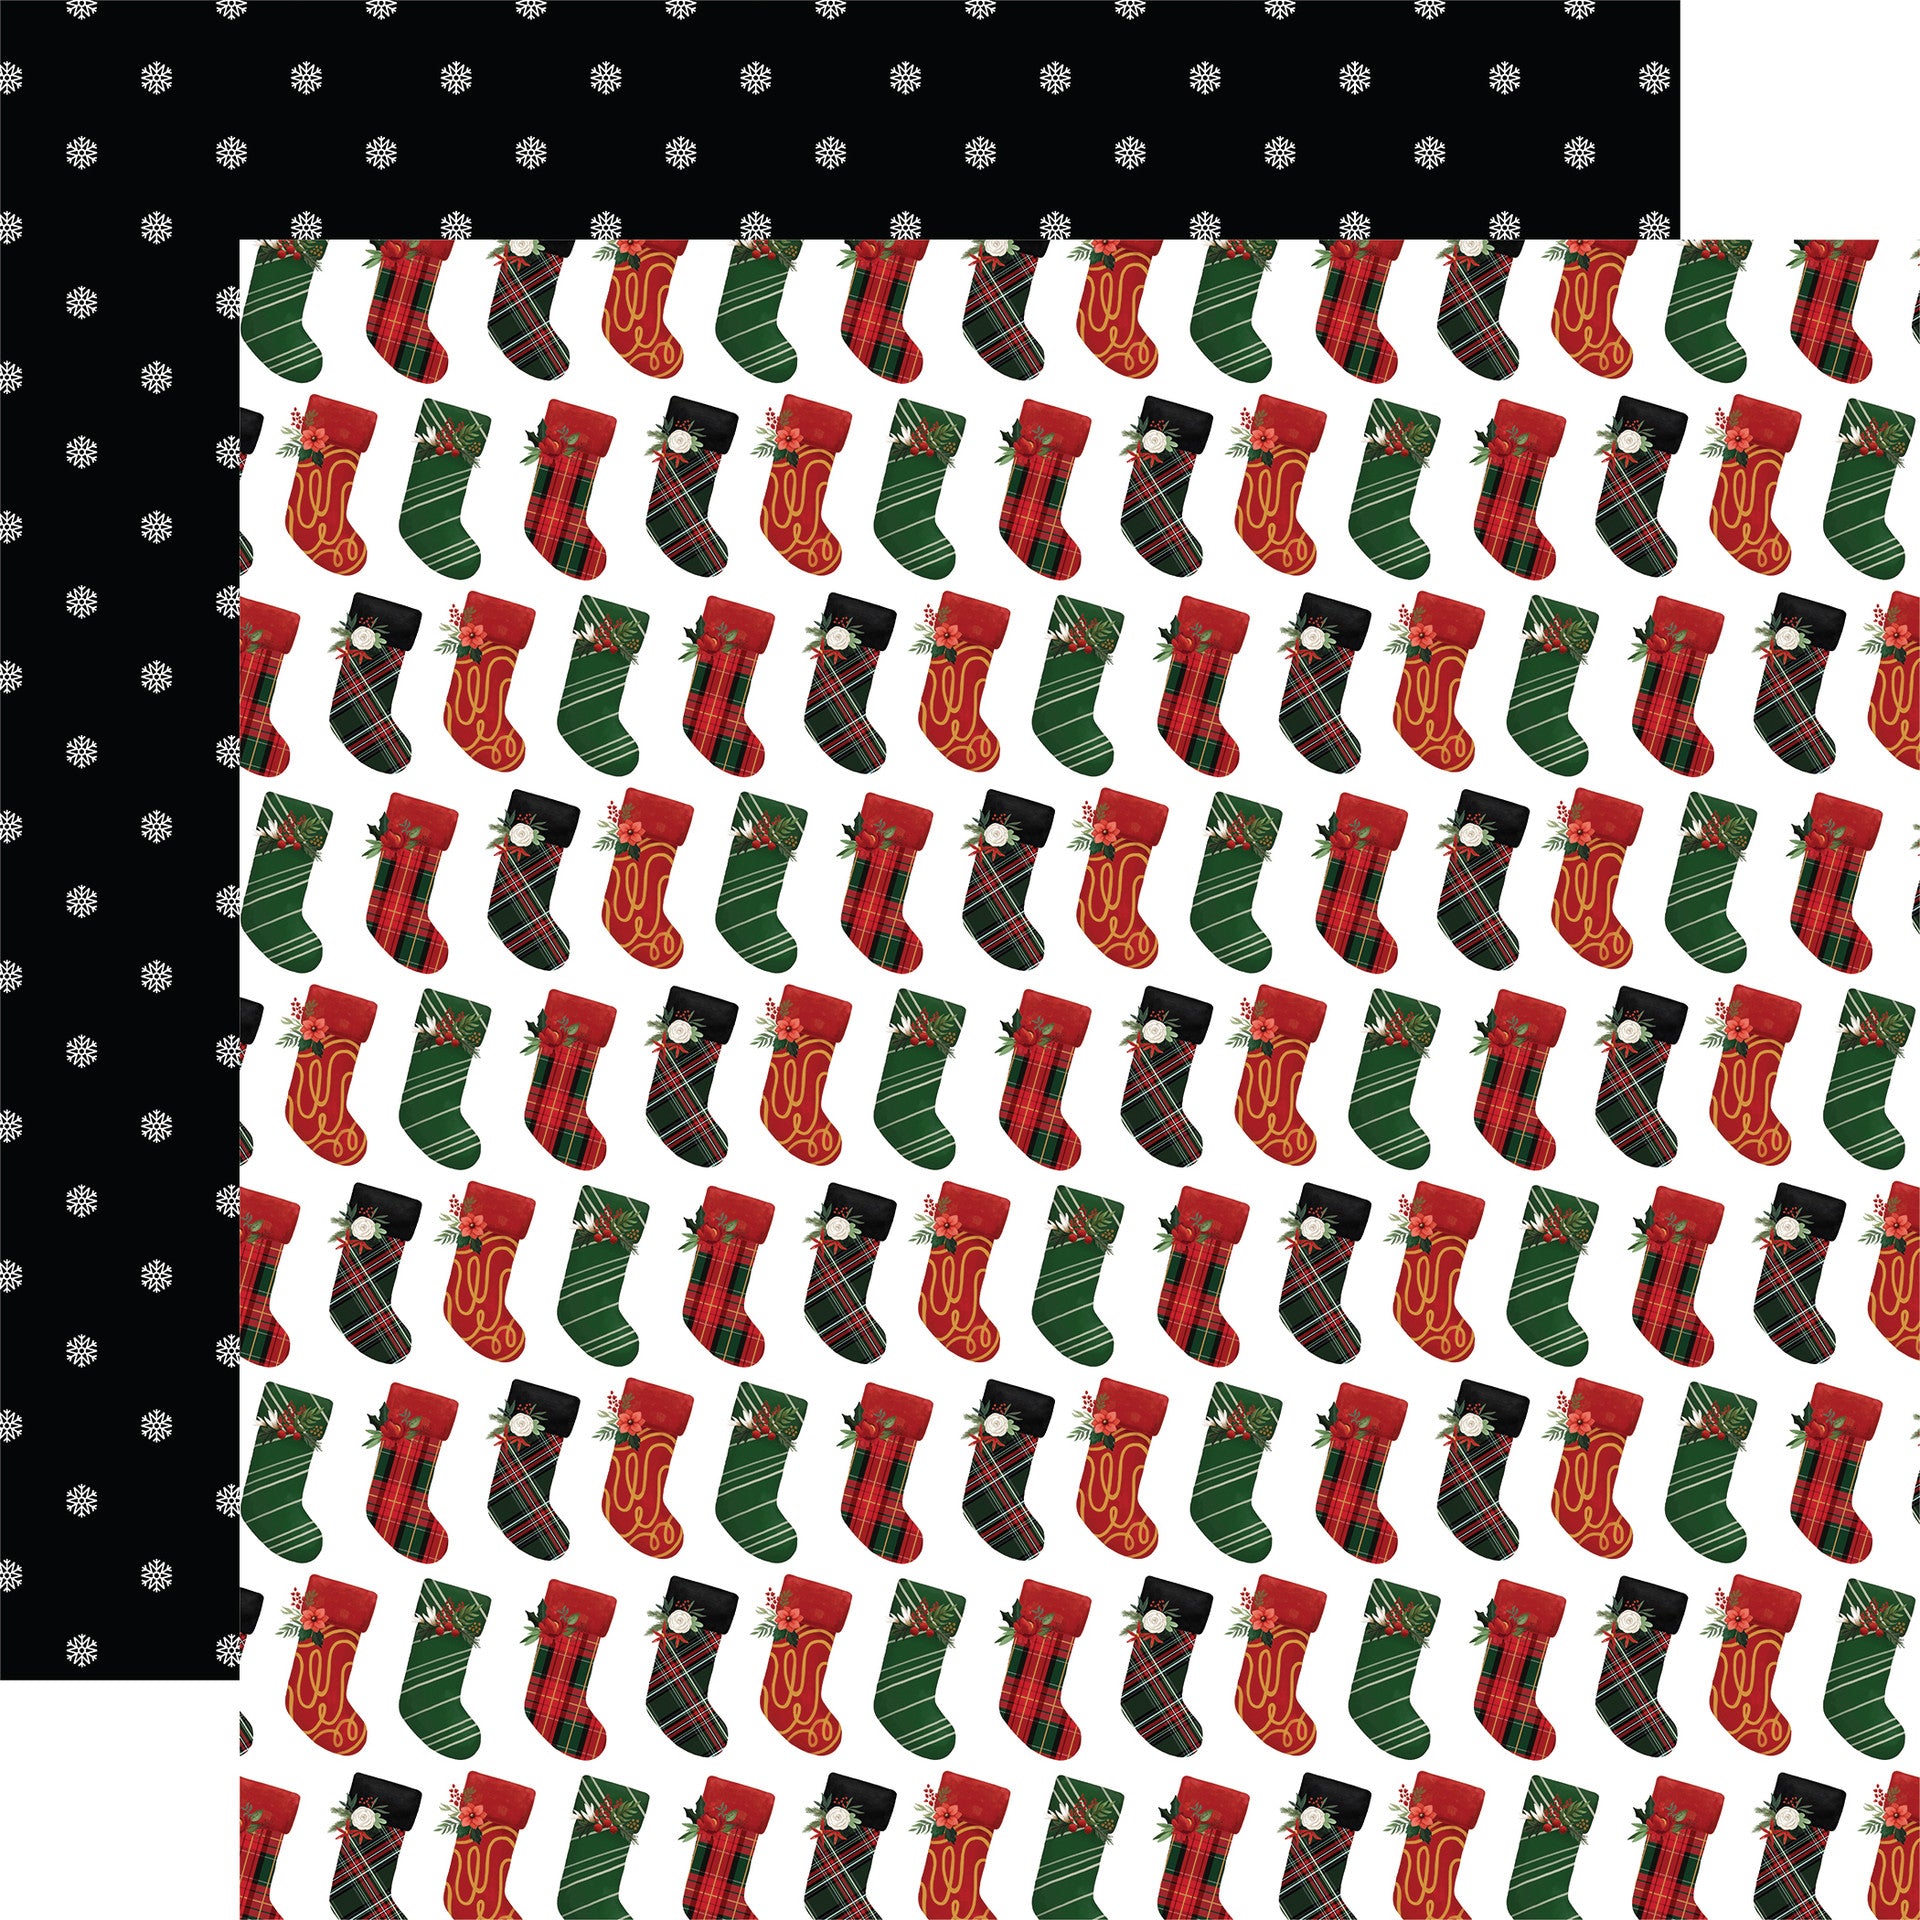 A Wonderful Christmas Stockings were Hung Patterned Paper